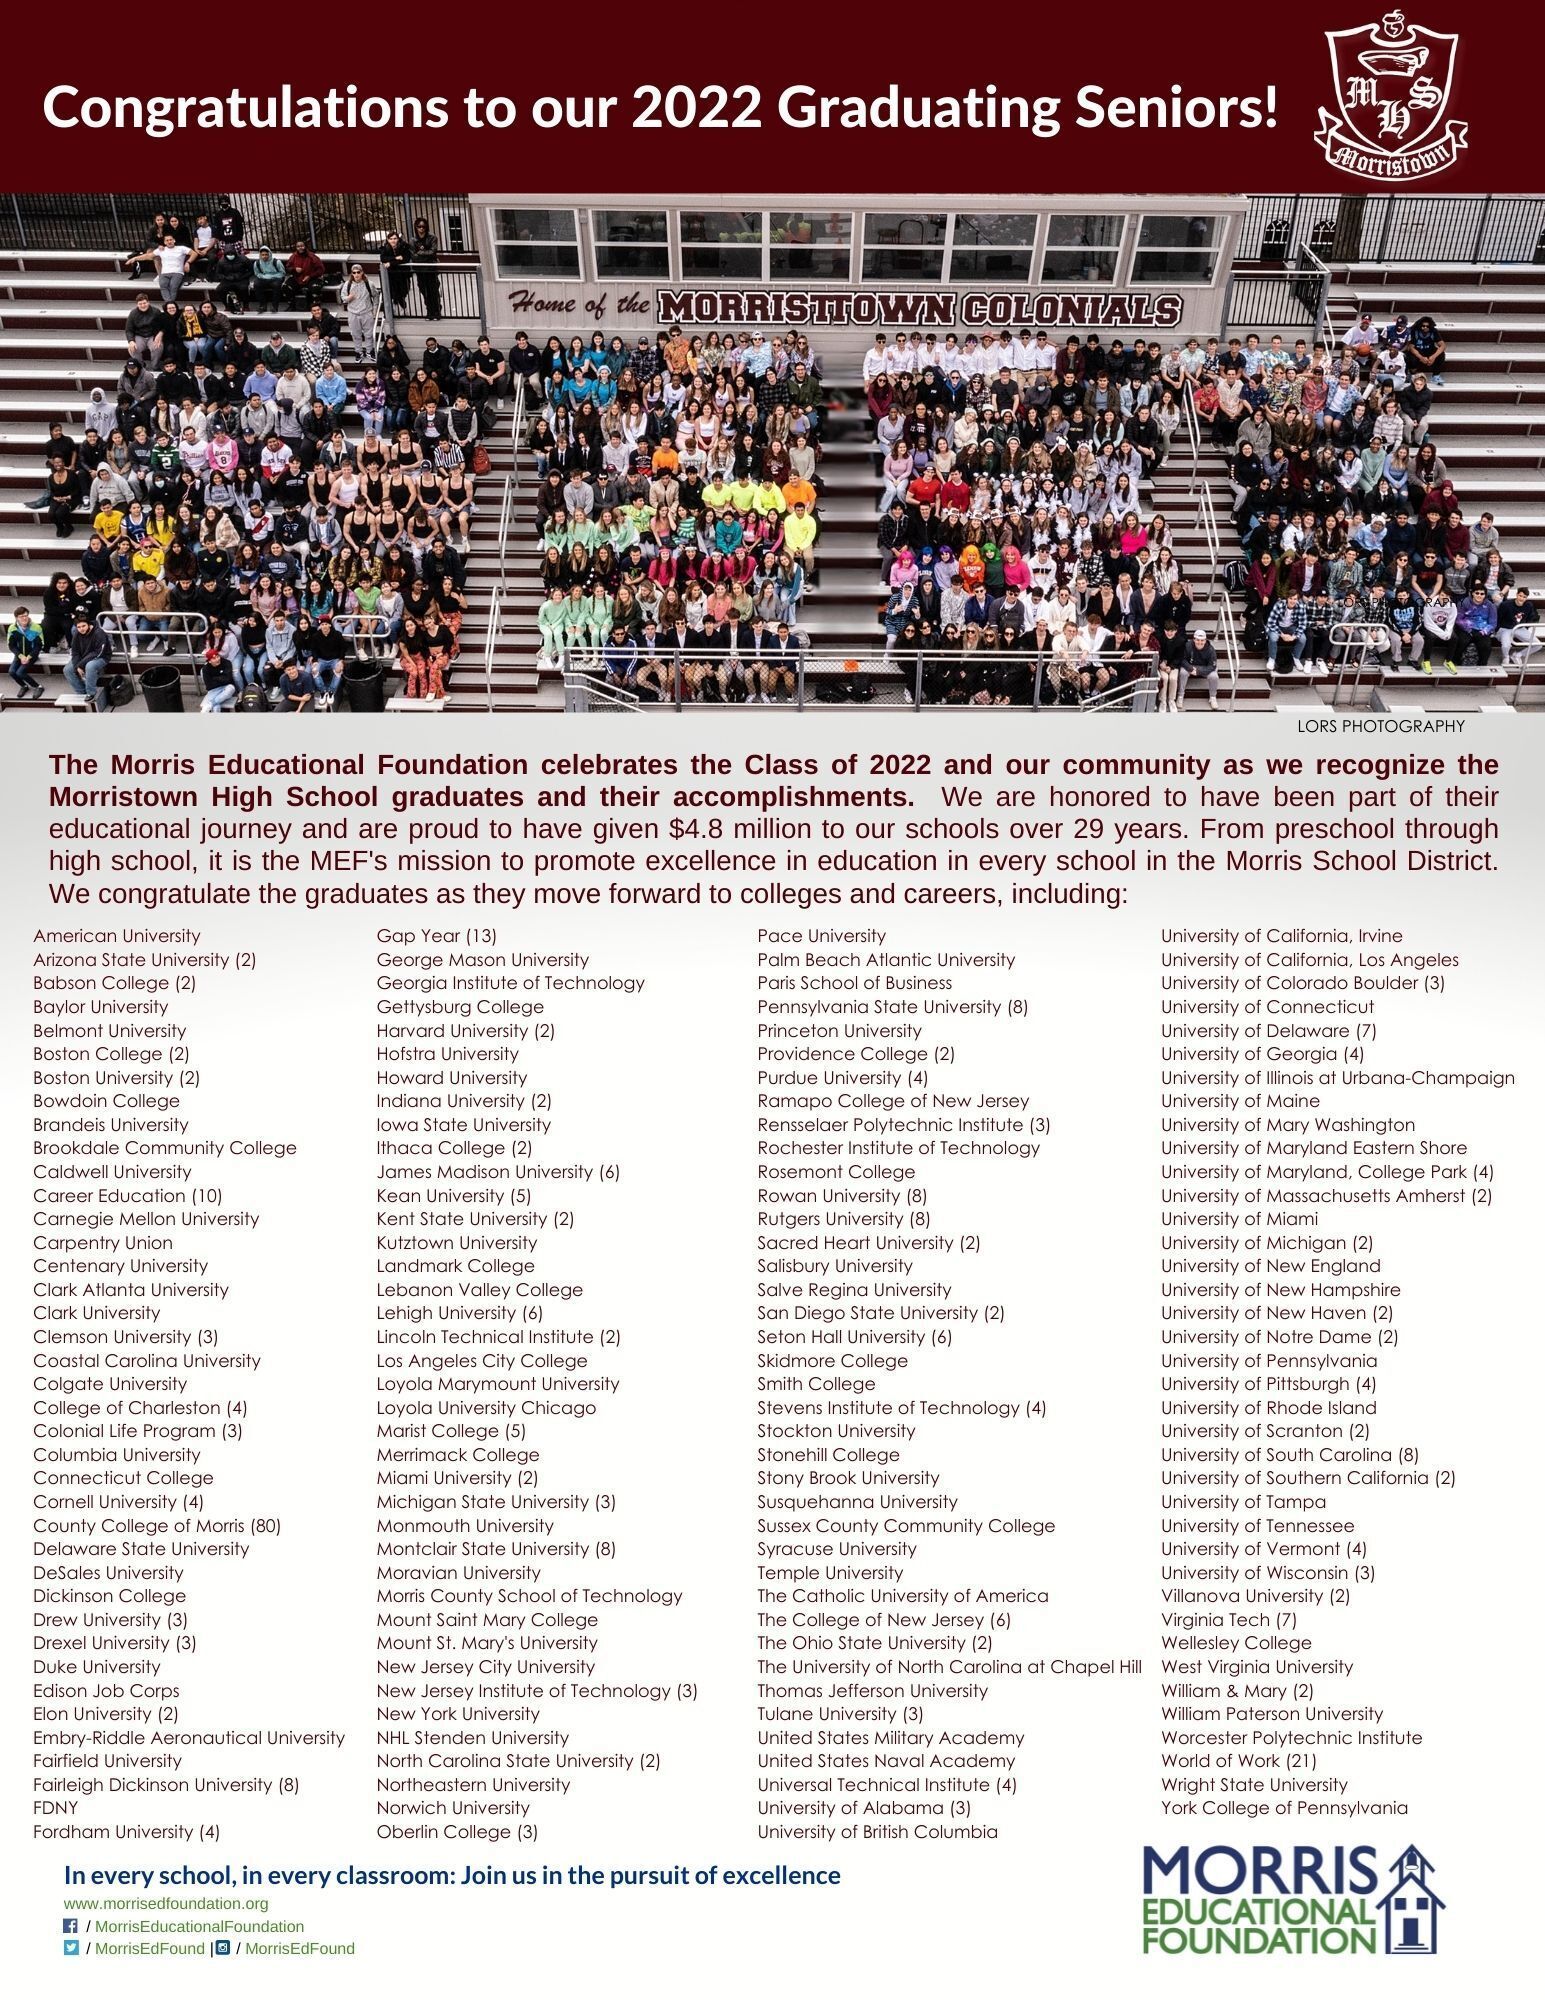 Congratulations to the Morristown High School Class of 2022